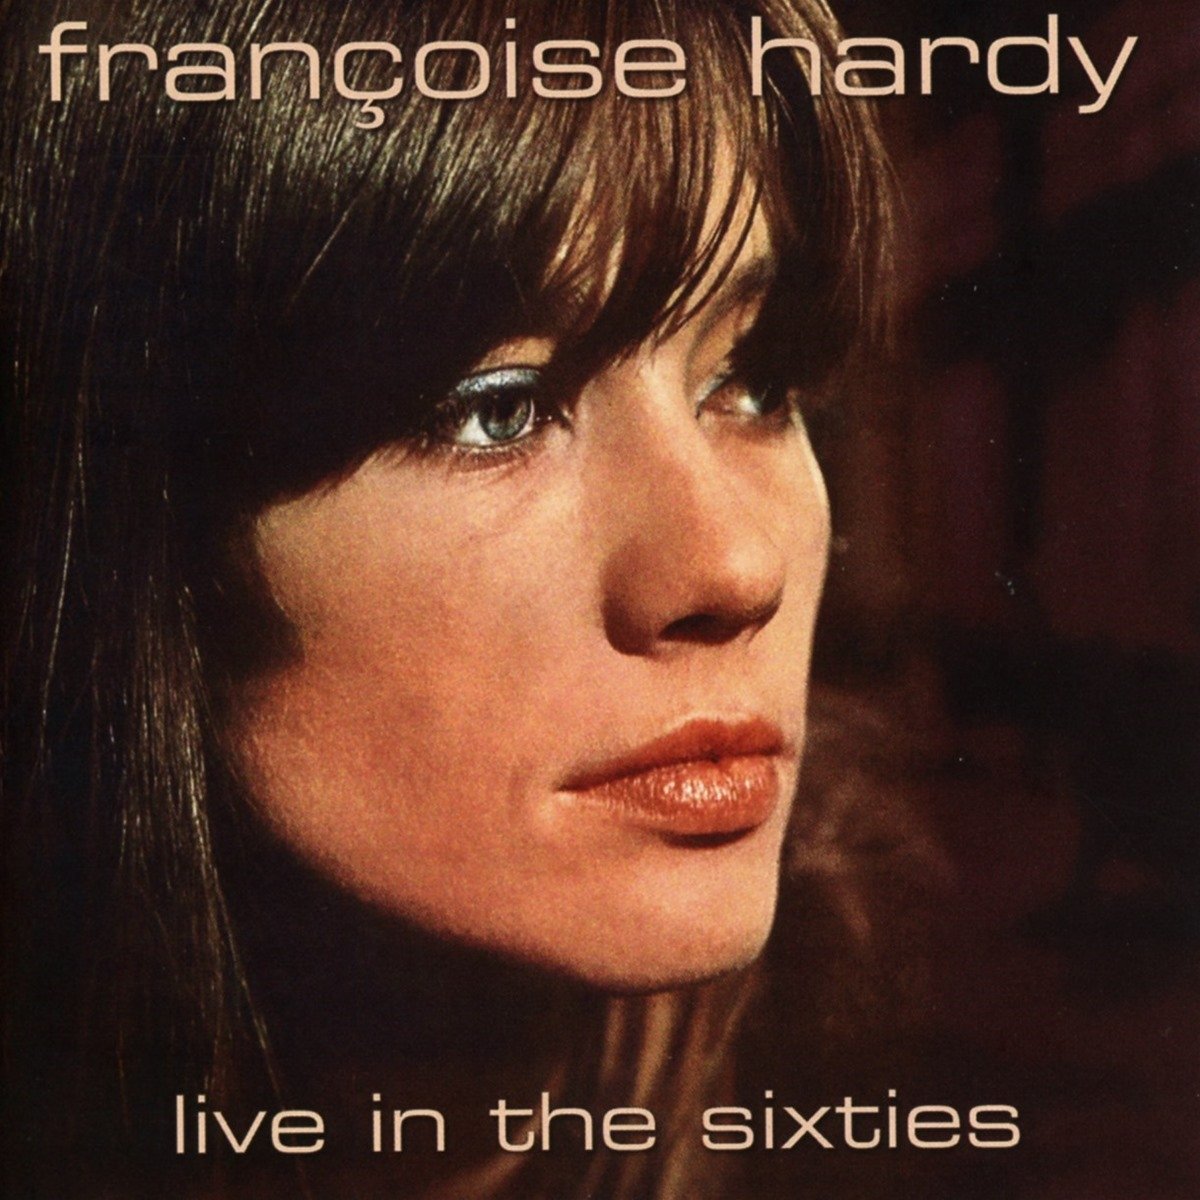 Francoise hardy / Live in the sixties